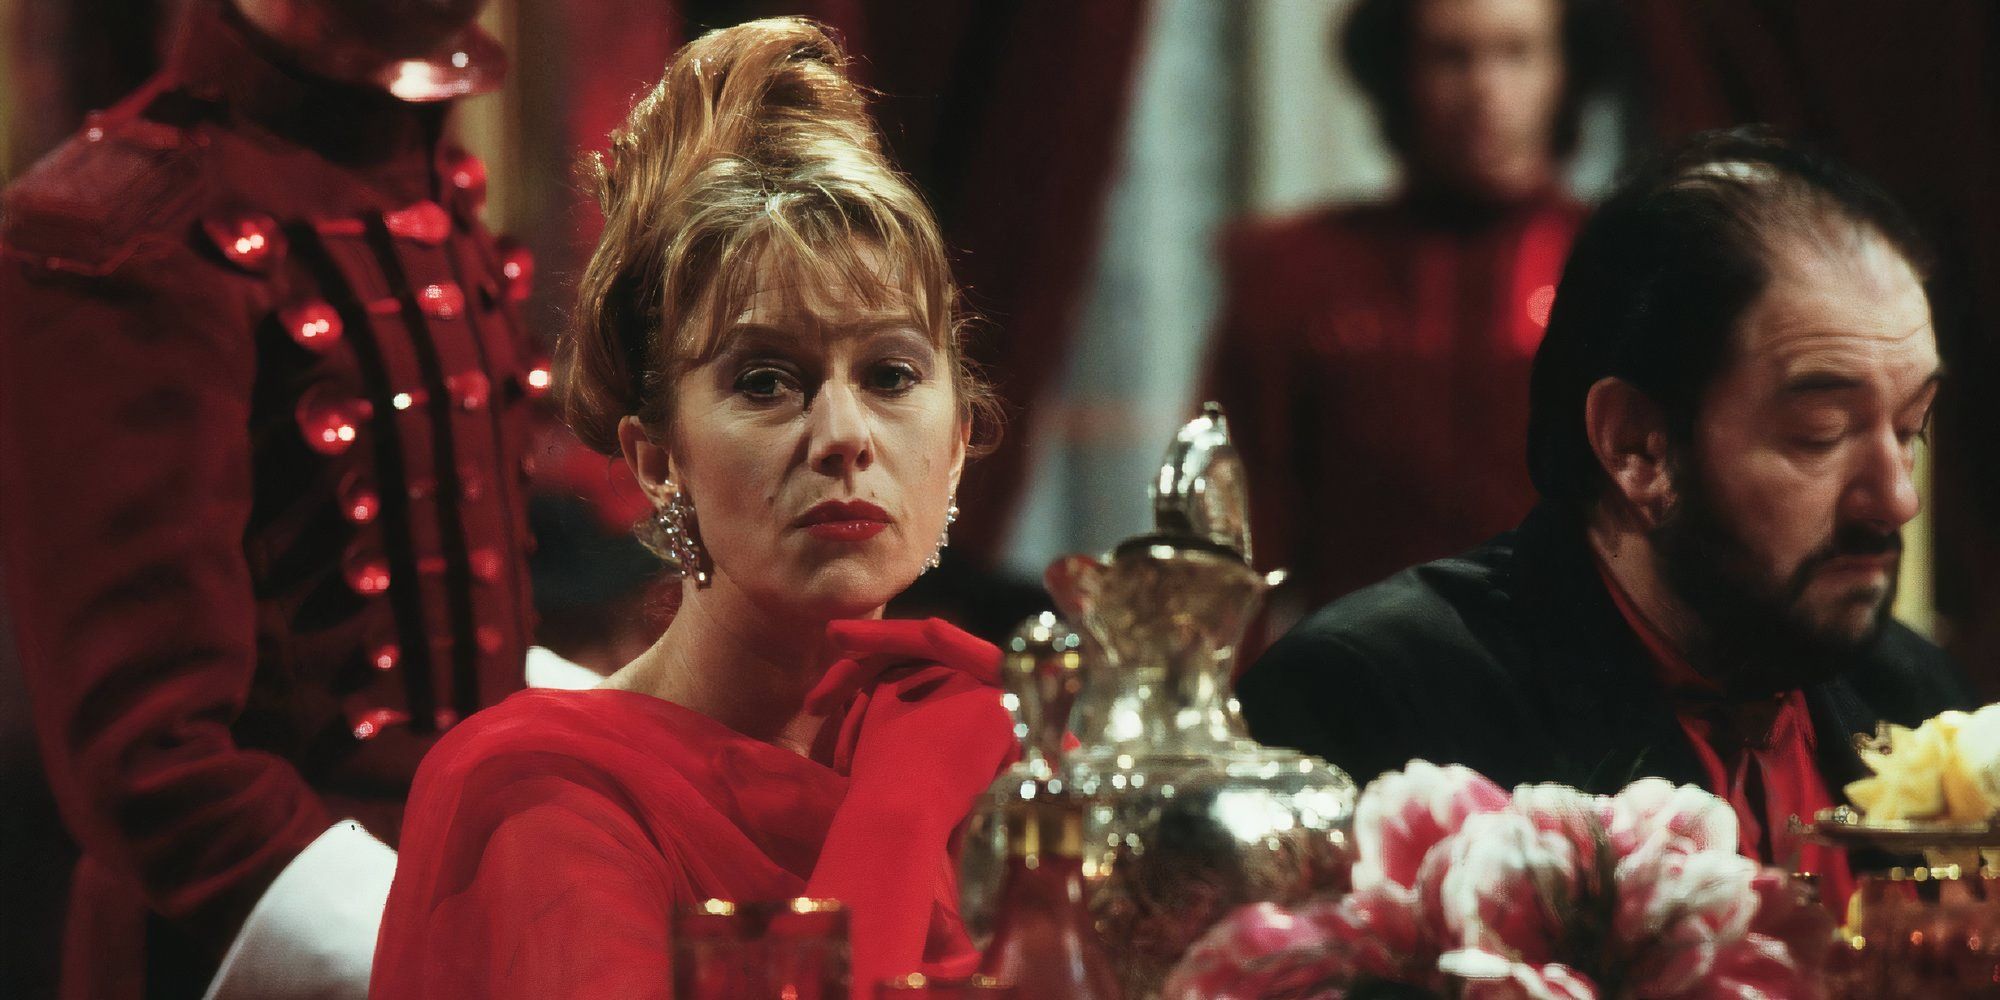 Helen Mirren as Georgina Spica wearing red while sitting at the table in The Cook, the Thief, His Wife & Her Lover.